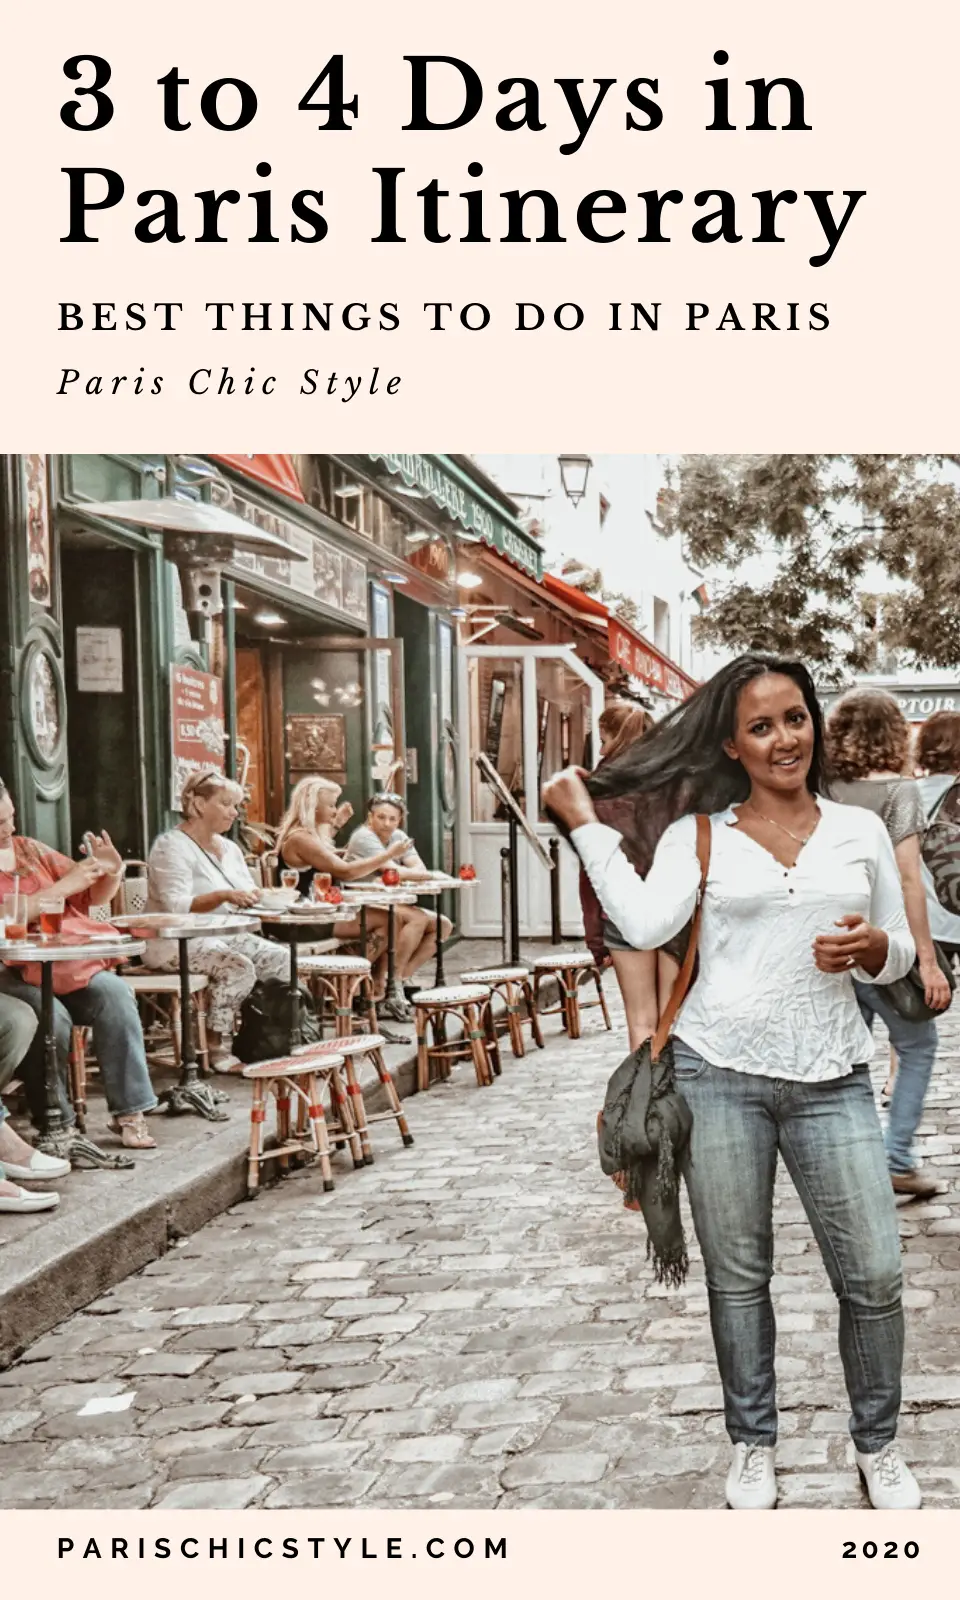 Paris Chic Style 3 to 4 days in Paris Itinerary travel guide